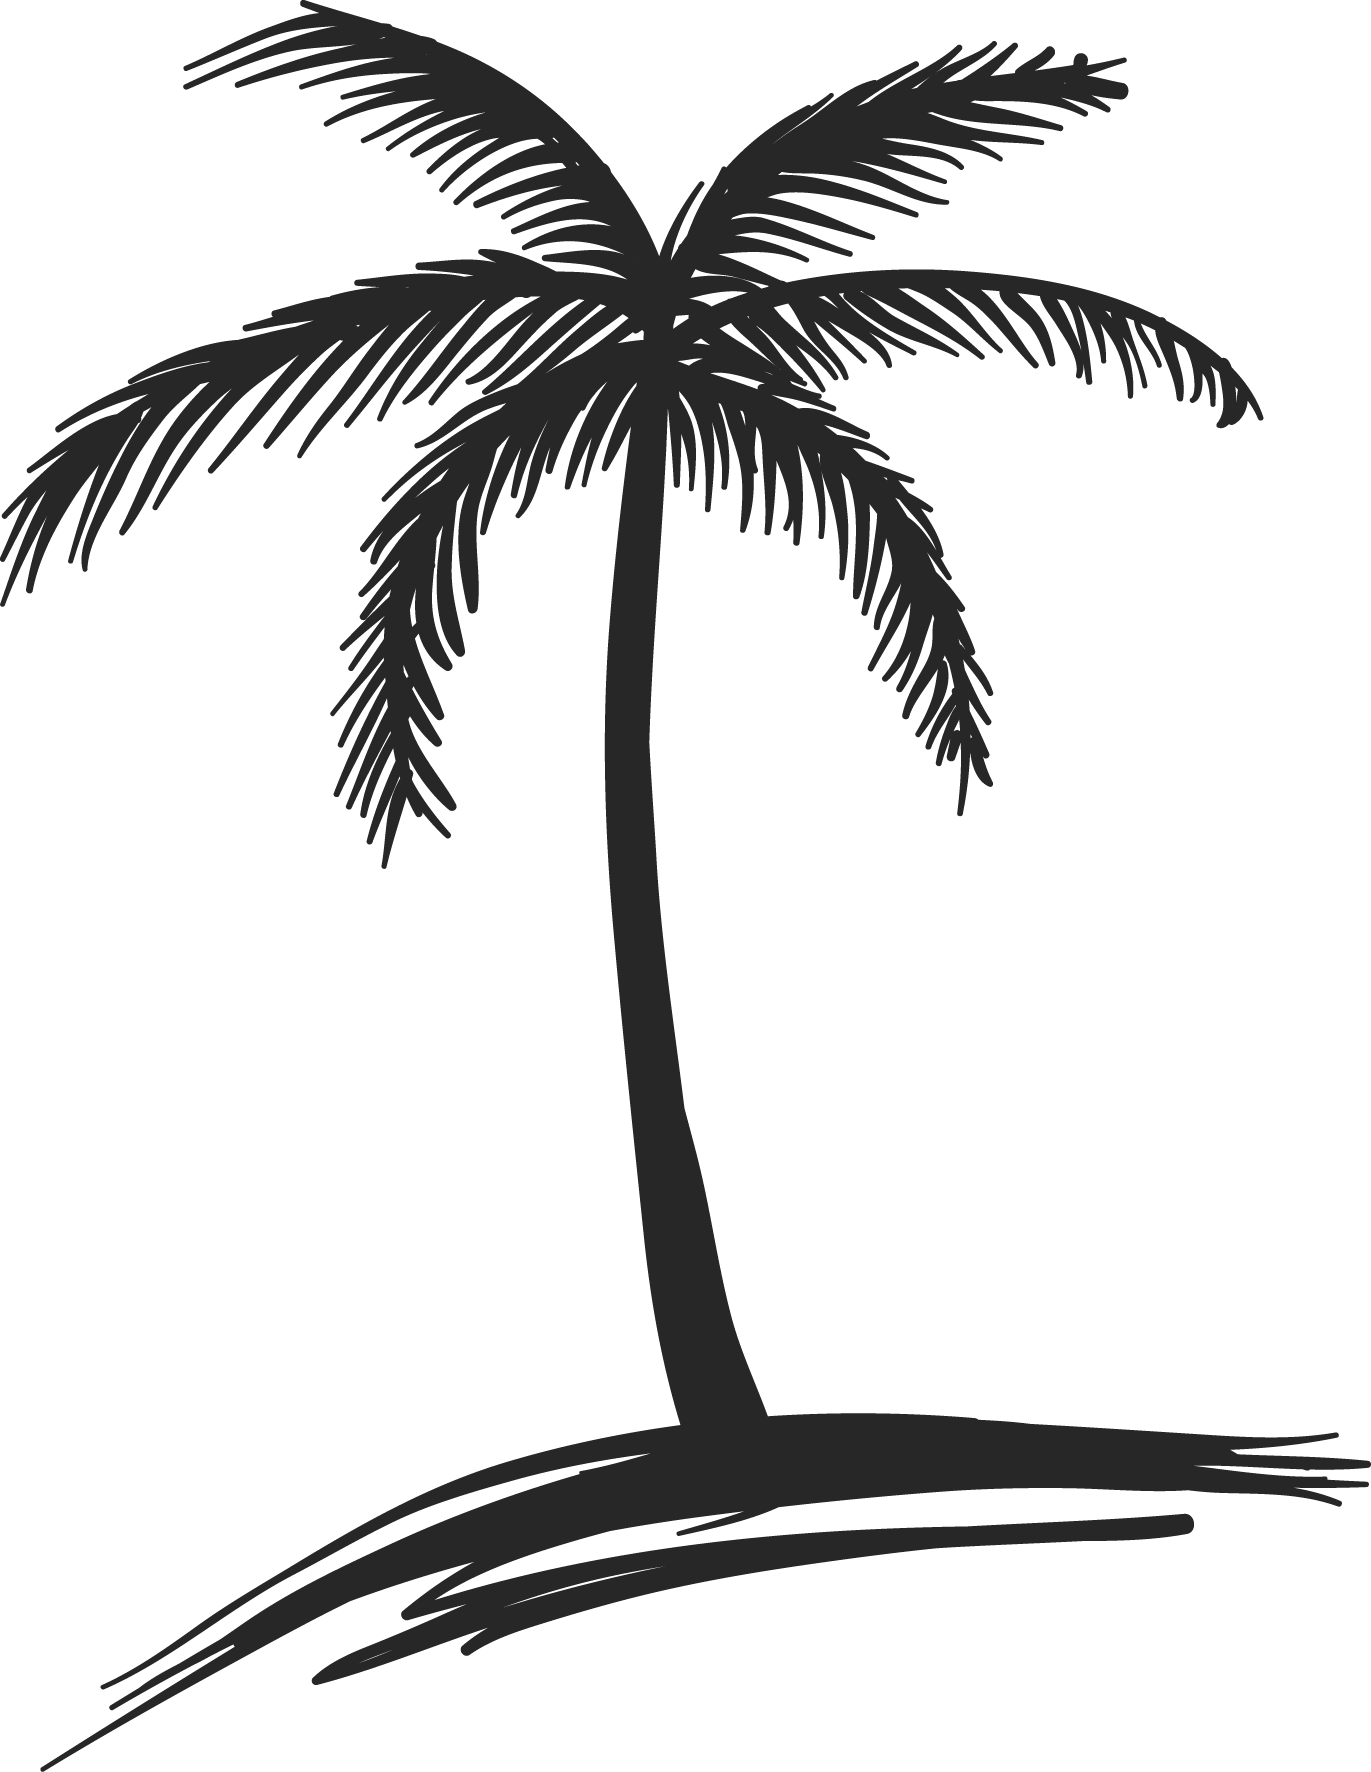 Palm Tree Leaves Drawing Outline ~ Palm Coloring Leaf Tree Branch ...